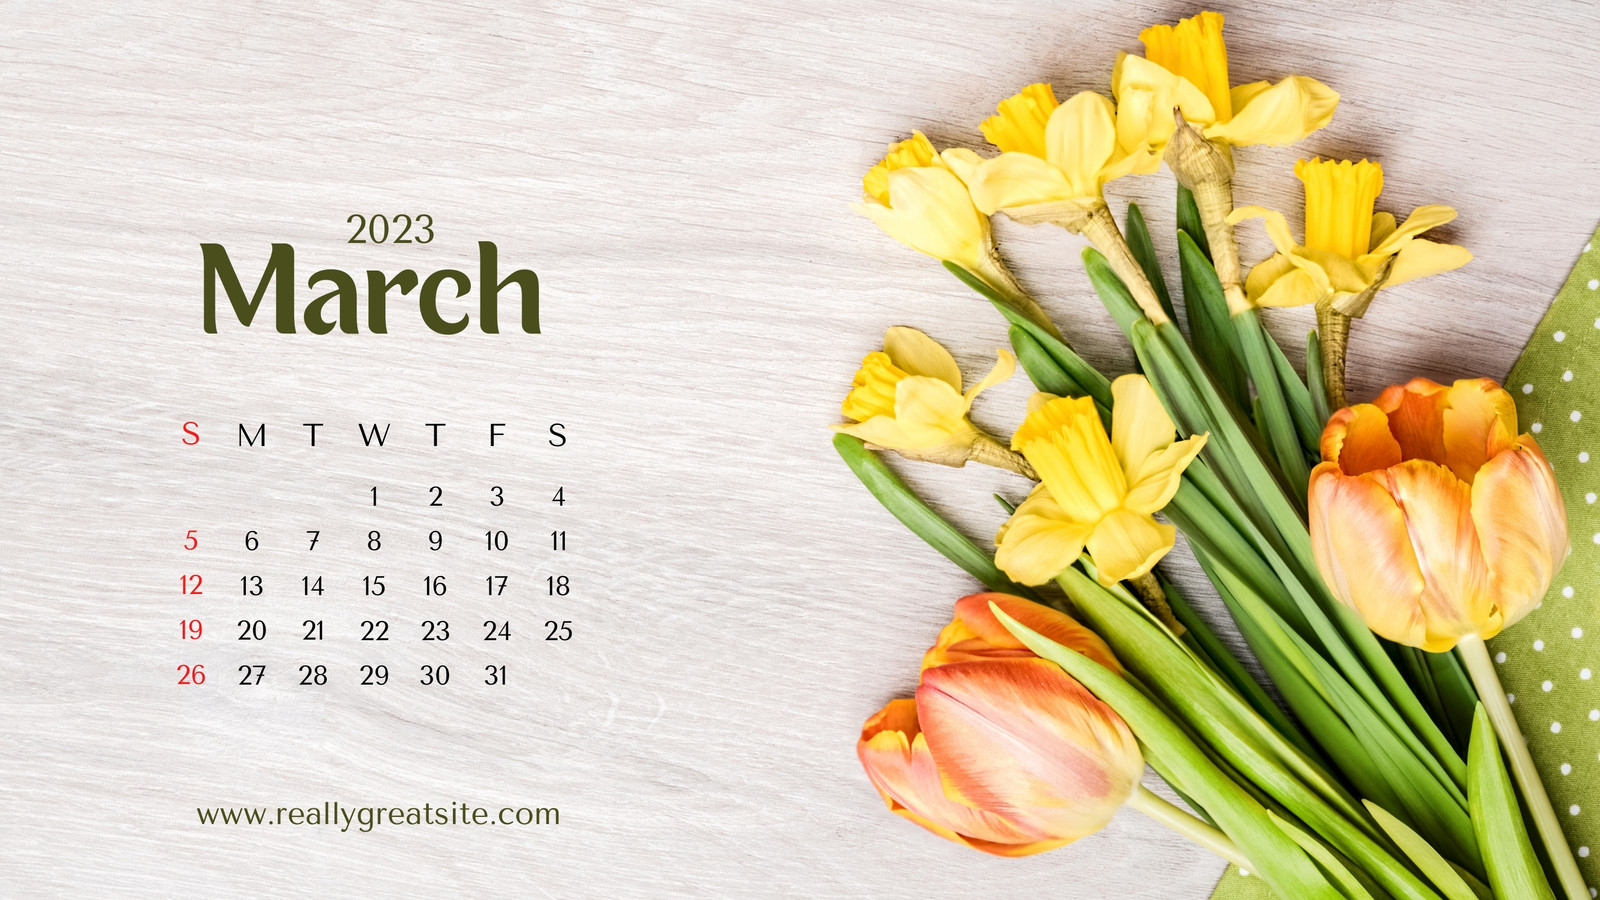 Free download Page 5 Free and customizable calendar templates Canva  1600x900 for your Desktop Mobile  Tablet  Explore 61 March 2023  Calendar Wallpapers  March Calendar Wallpaper March Calendar Wallpaper  2016 Wallpaper Calendar March 2016